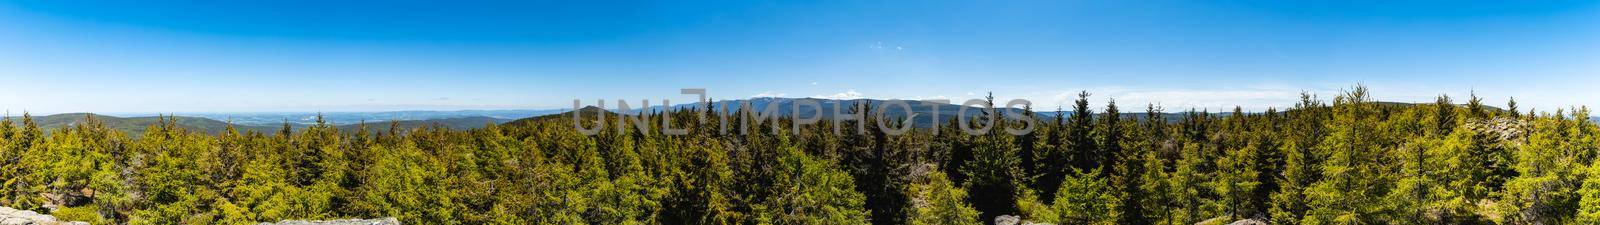 360 panorama over high trees and hills of Jizera Mountains  by Wierzchu